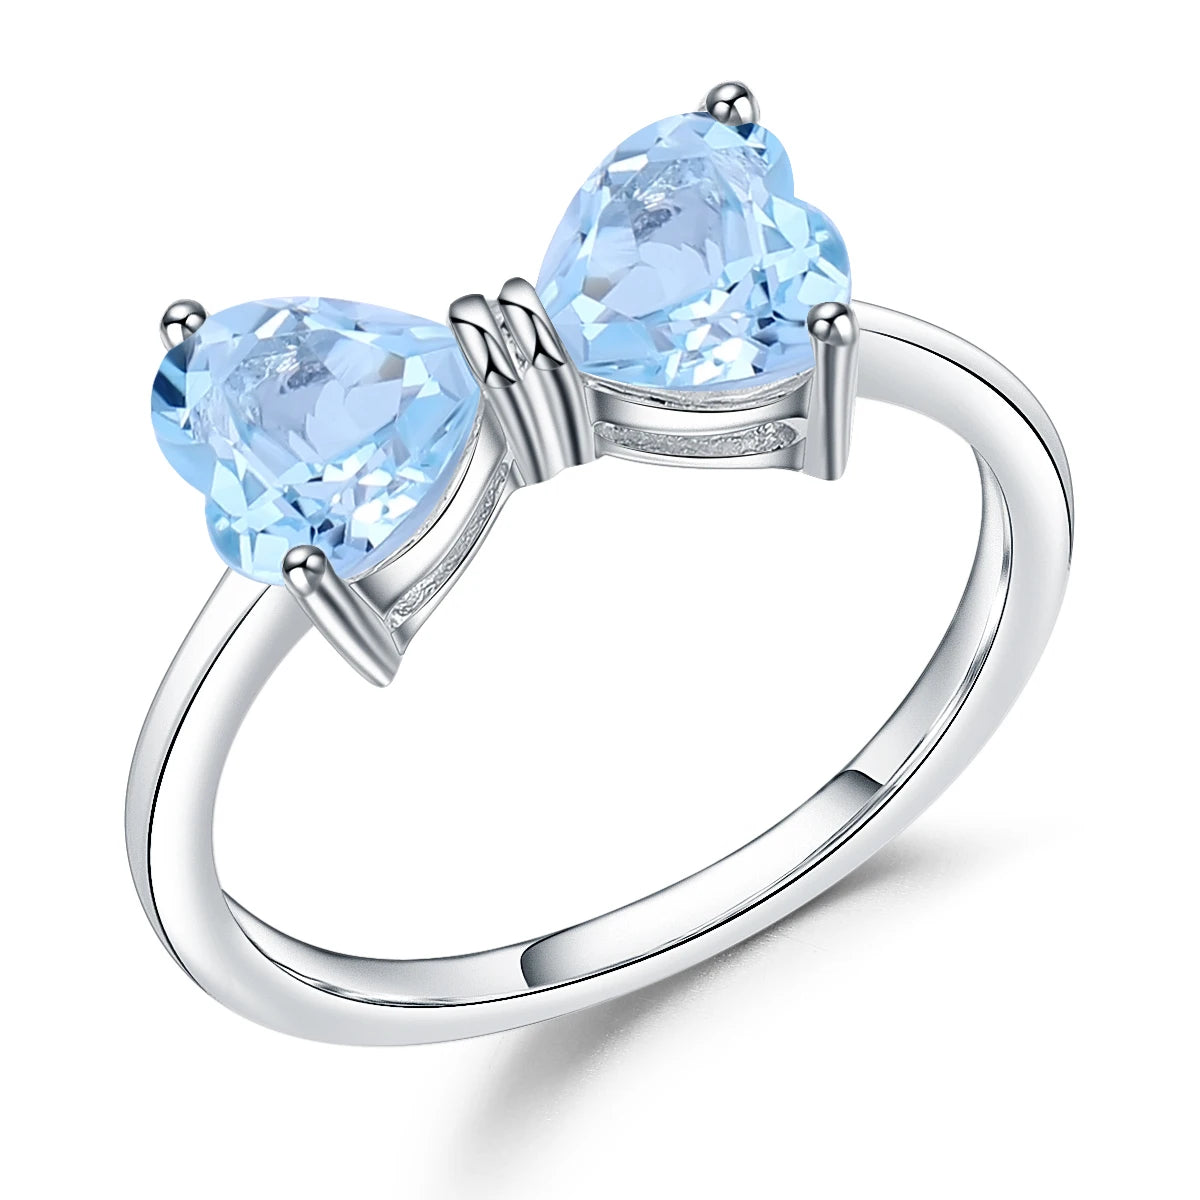 GEM'S BALLET 925 Sterling Silver Bow Knot Ring 1.56Ct Natural Citrine Gemstone Rings For Women Valentine's Day Gift Jewelry Sky Blue Topaz CHINA